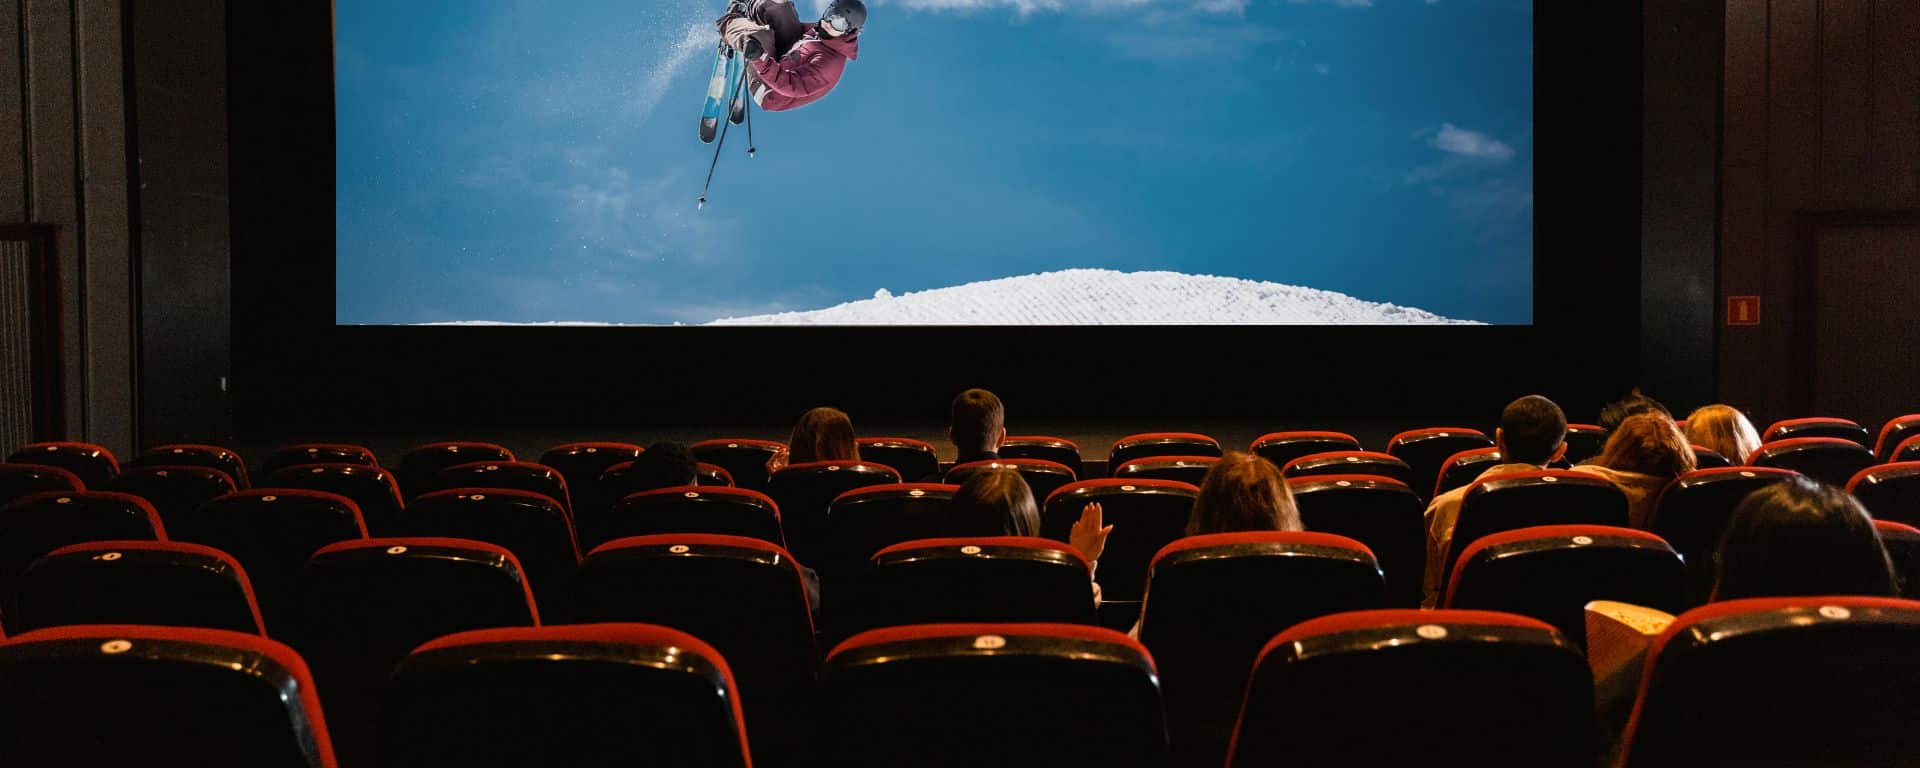 Best Ski Movies - Feature Image